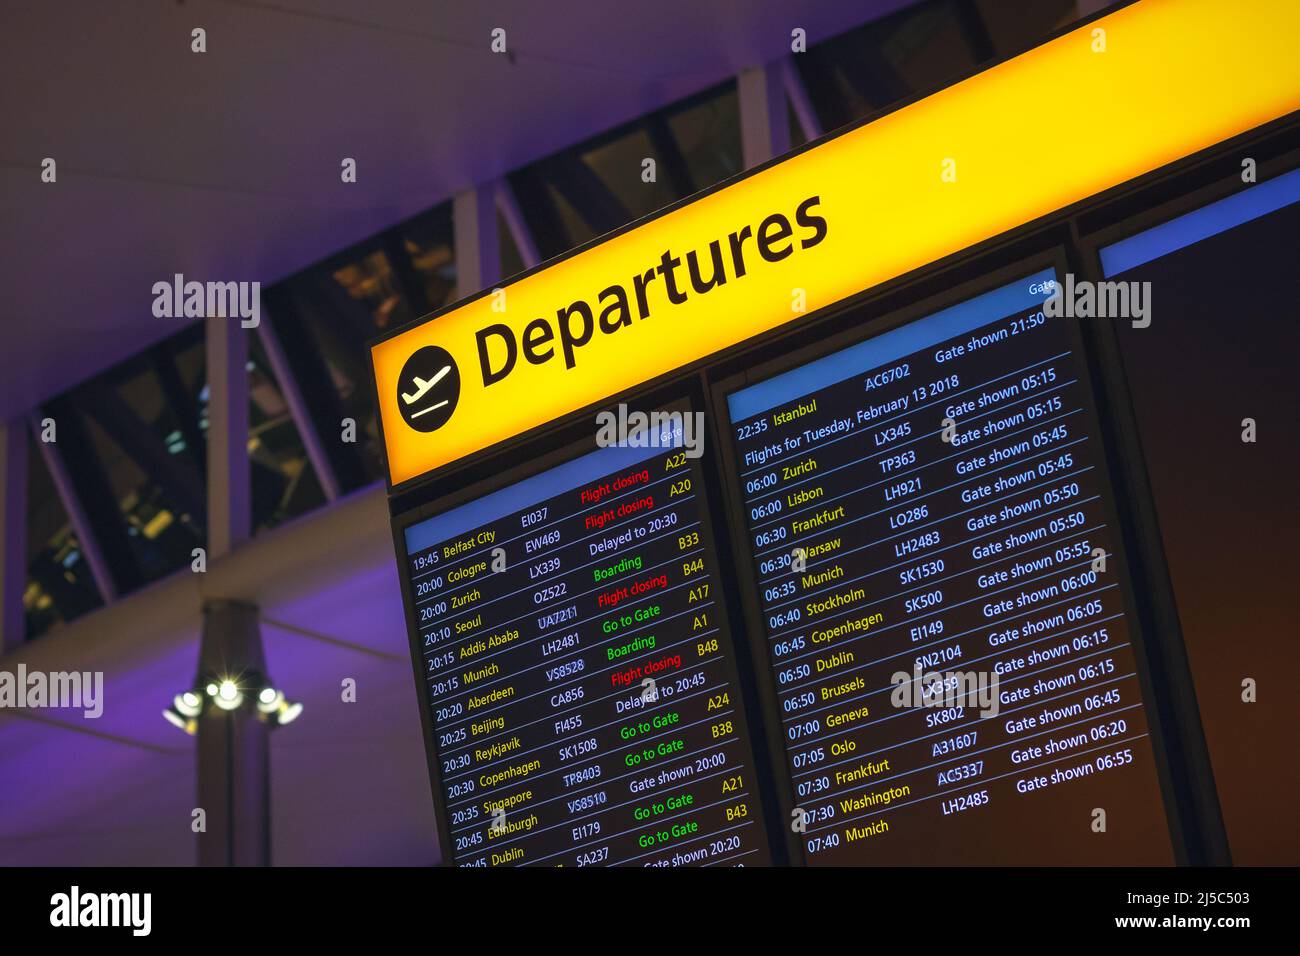 Departure board displaying time, destination cities and gate information in London Heathrow airport Stock Photo